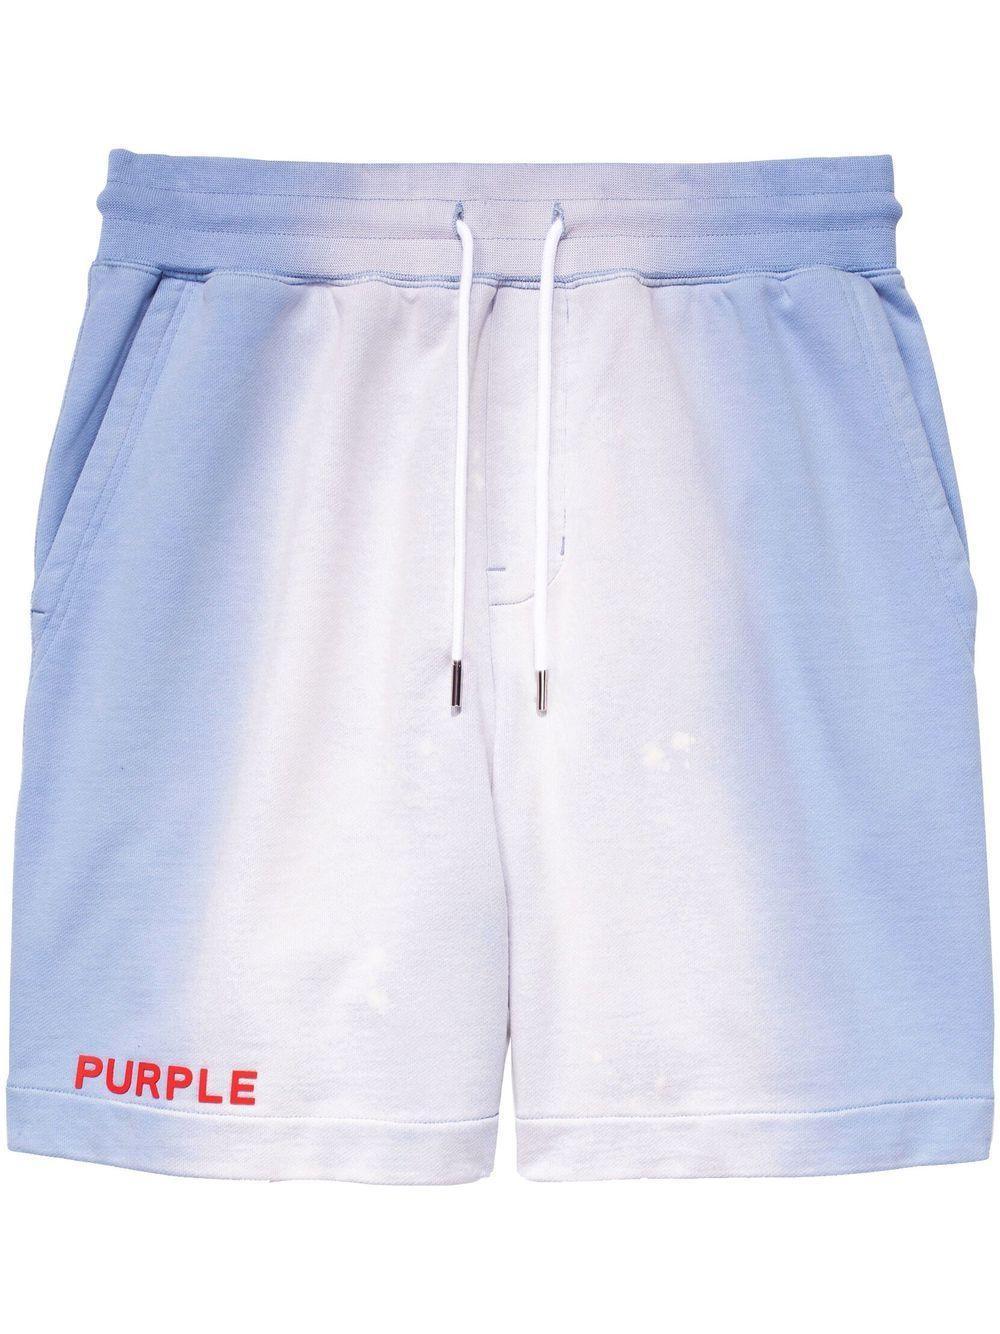 PURPLE BRAND P451 FRENCH TERRY SHORTS - Gravity NYC